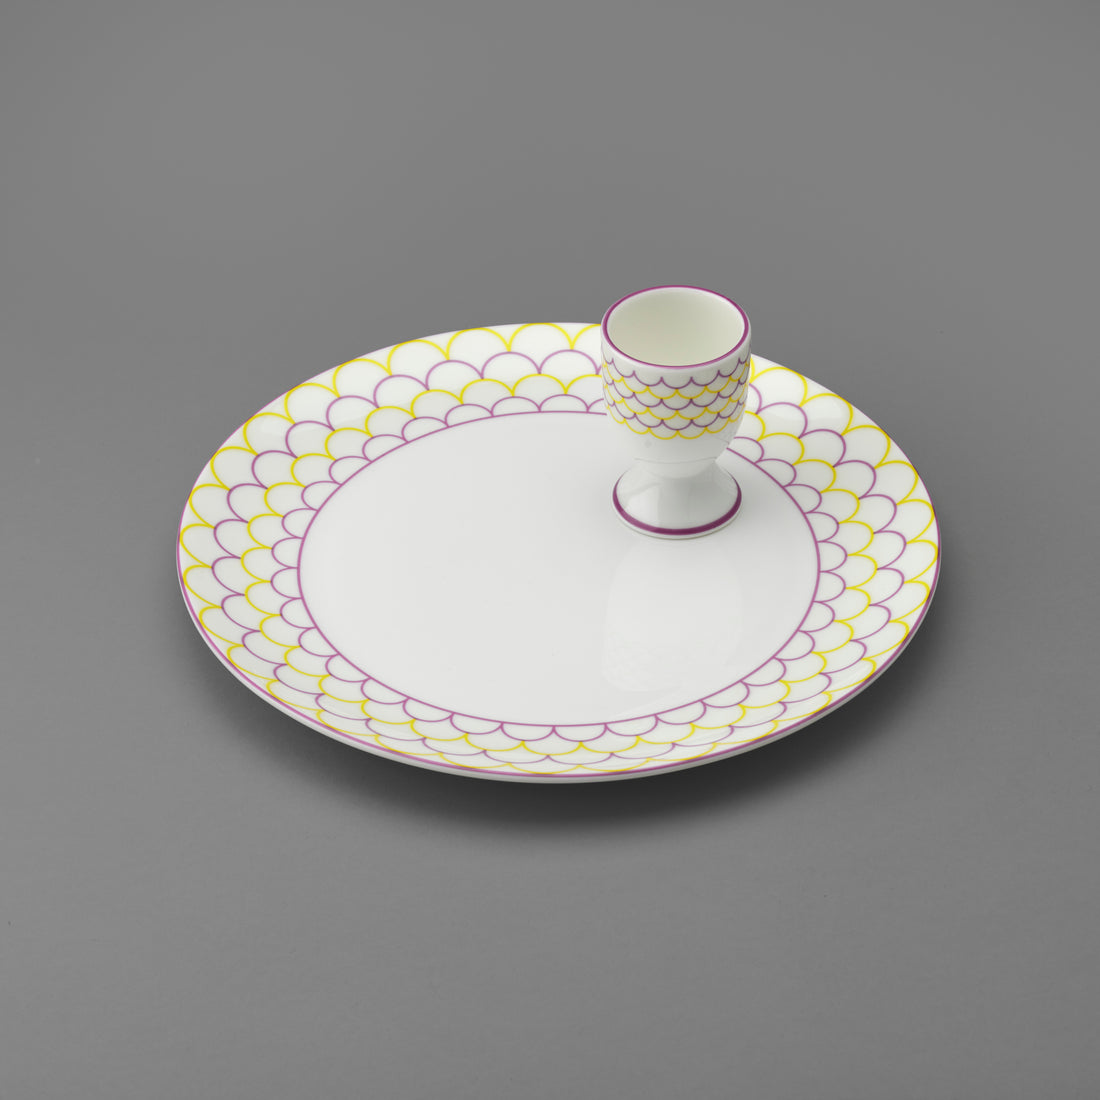 Ripple Egg Cup in Pink & Yellow